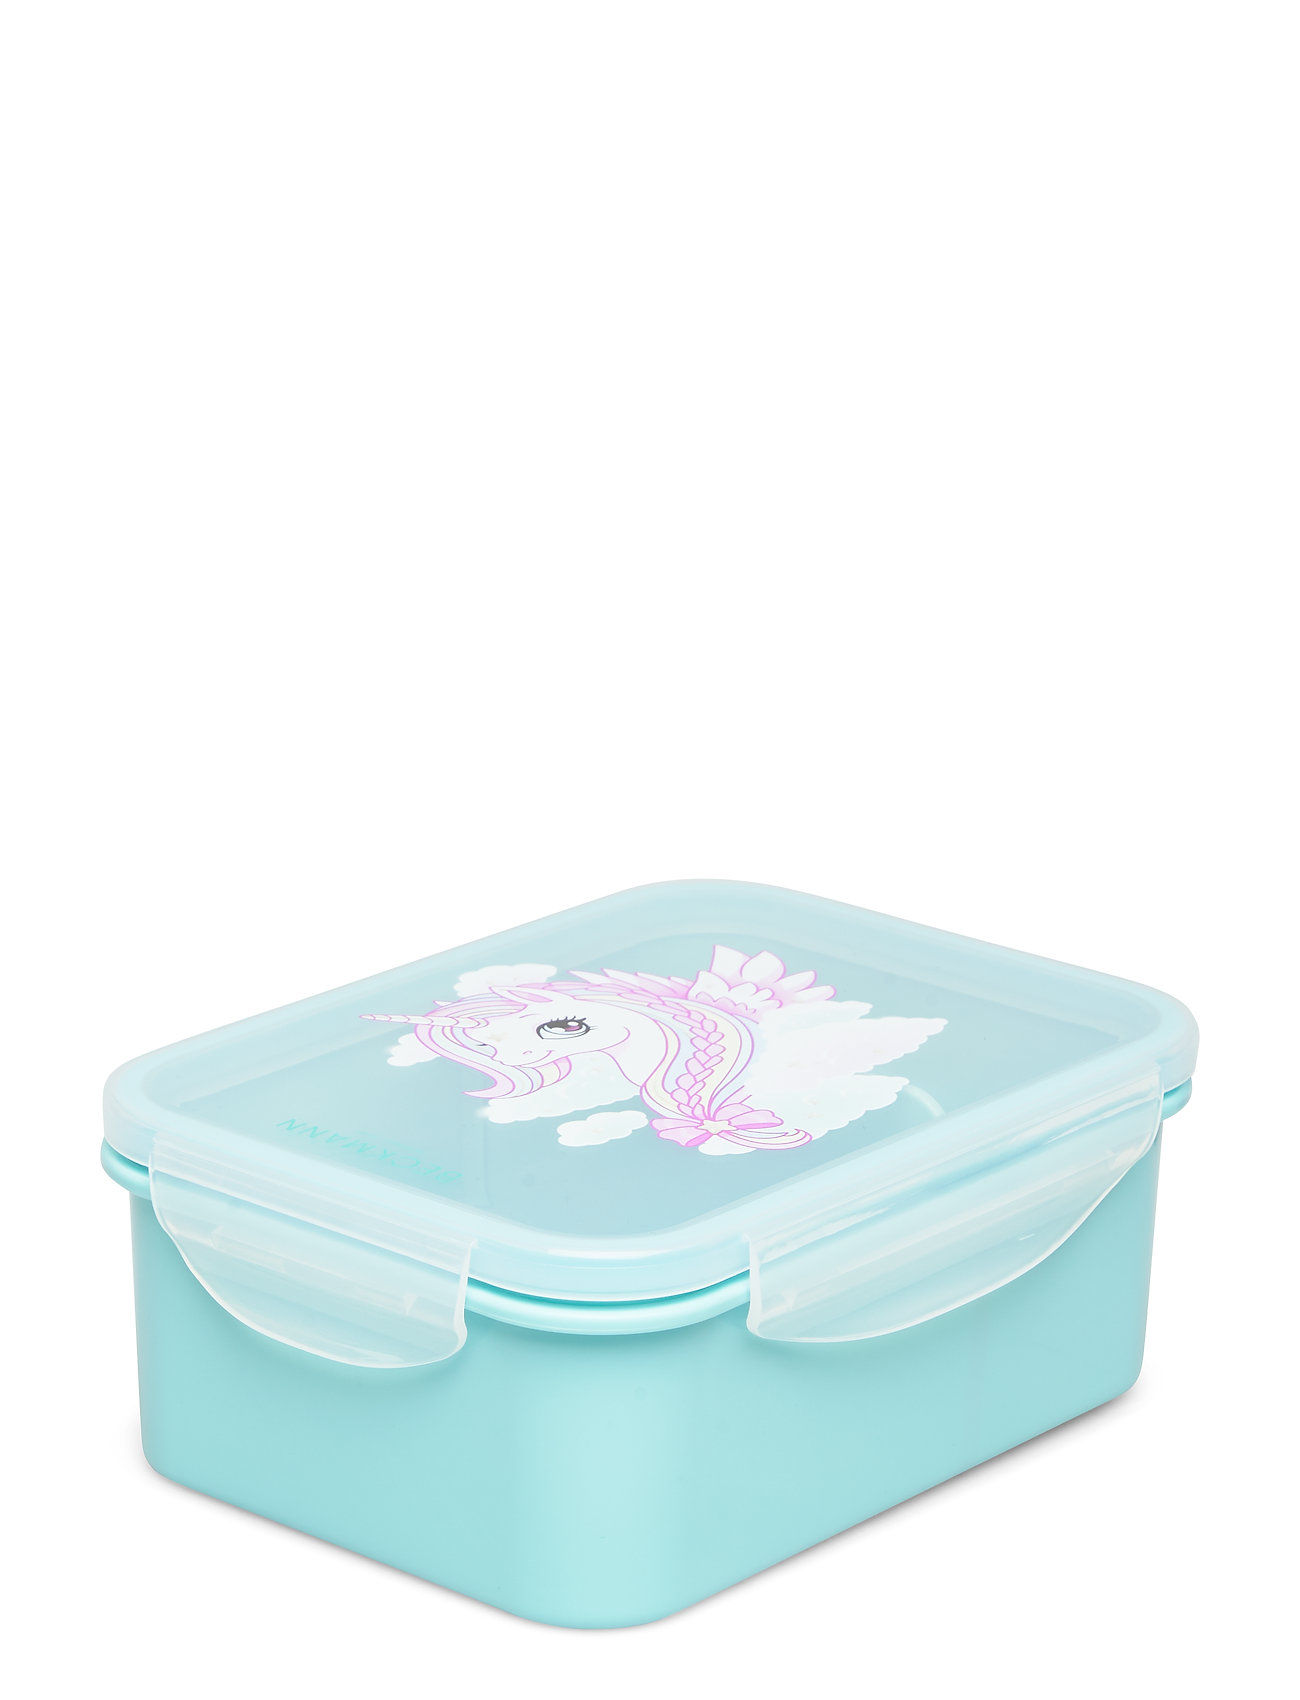 Lunch Box - Unicorn Home Meal Time Lunch Boxes Blue Beckmann Of Norway